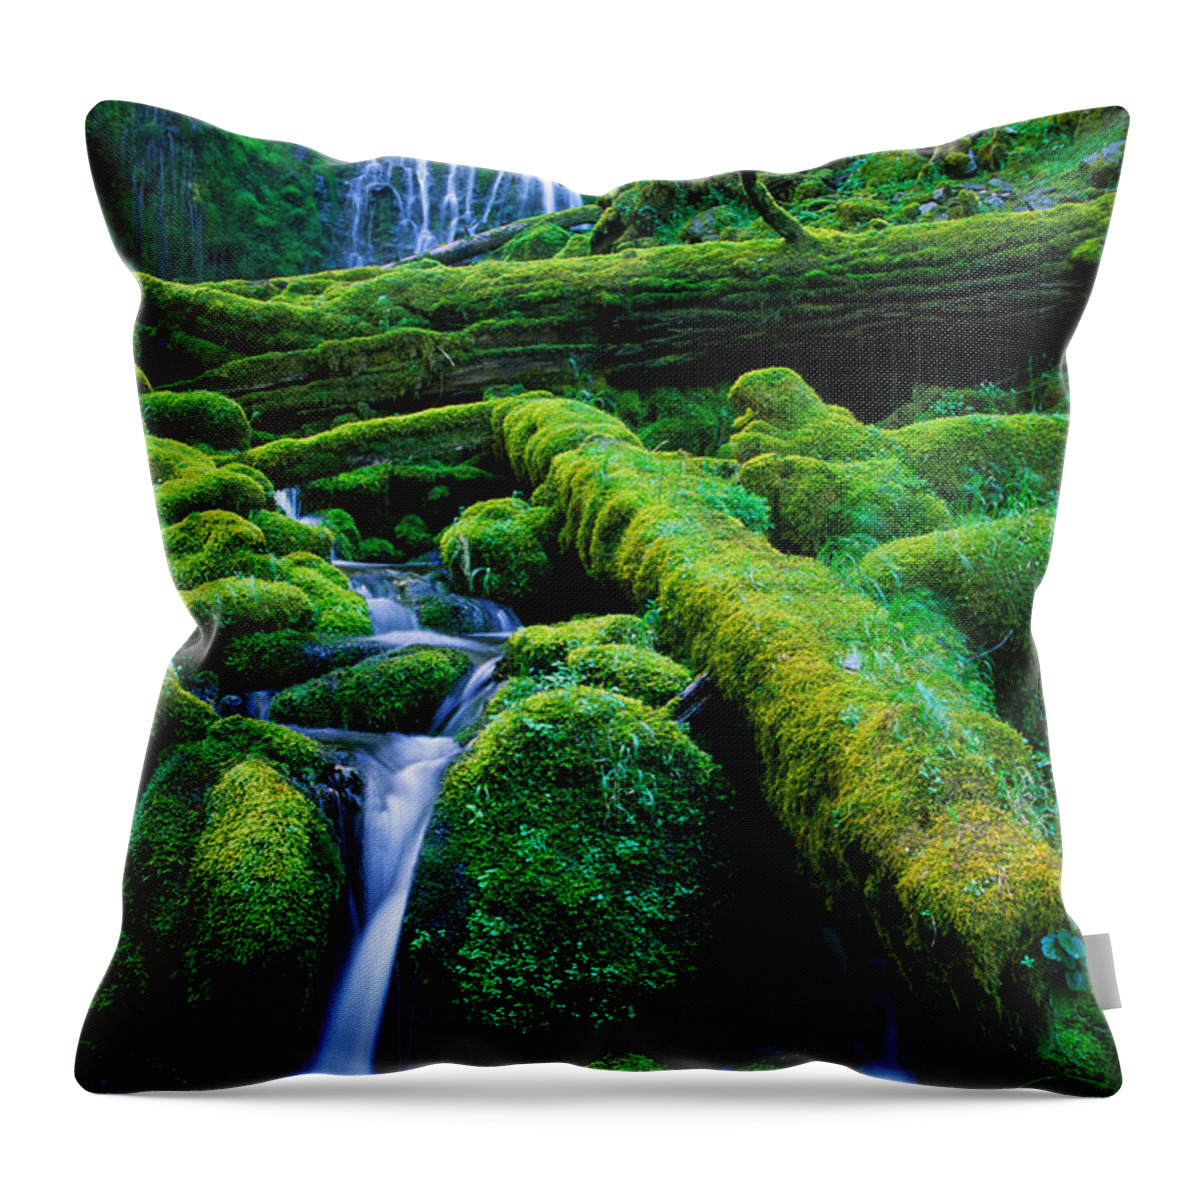 America Throw Pillow featuring the photograph Lower Proxy Falls by Inge Johnsson